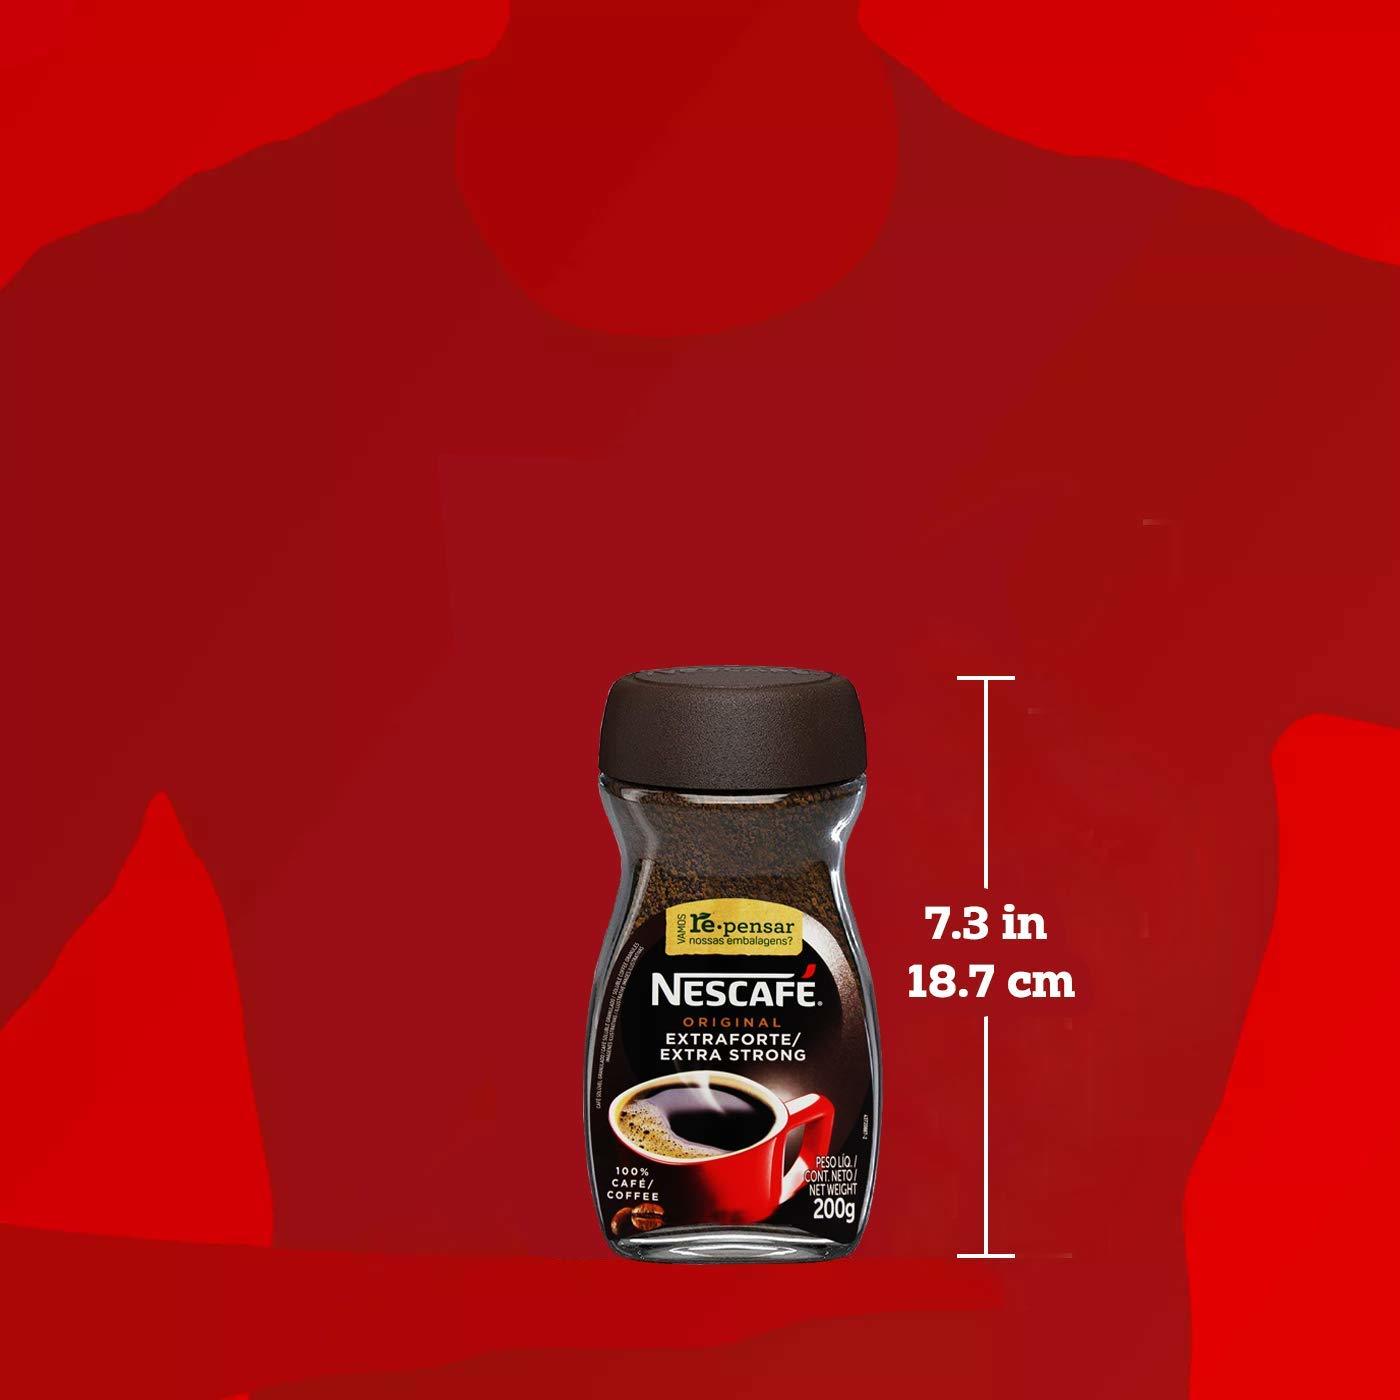 Nescafe- 3 in 1 Strong Instant Coffee Sticks in a Bag